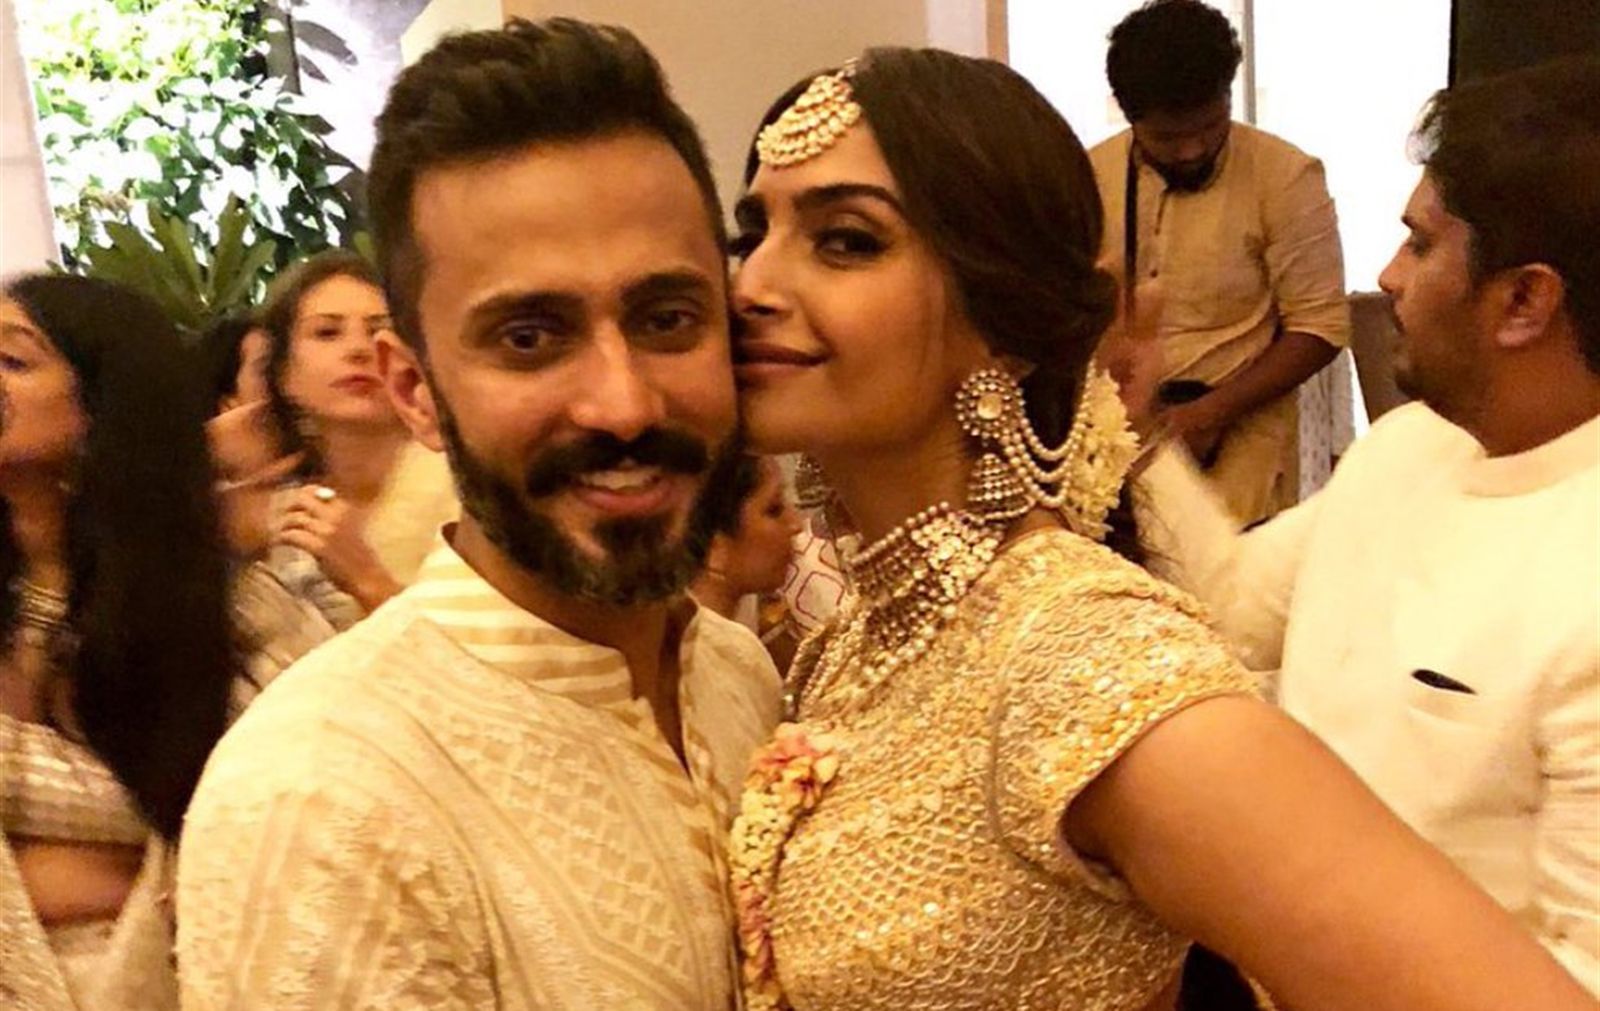 Sonam Kapoor Ahuja And Anand Ahuja Expecting Their First Child? Here’s The Truth